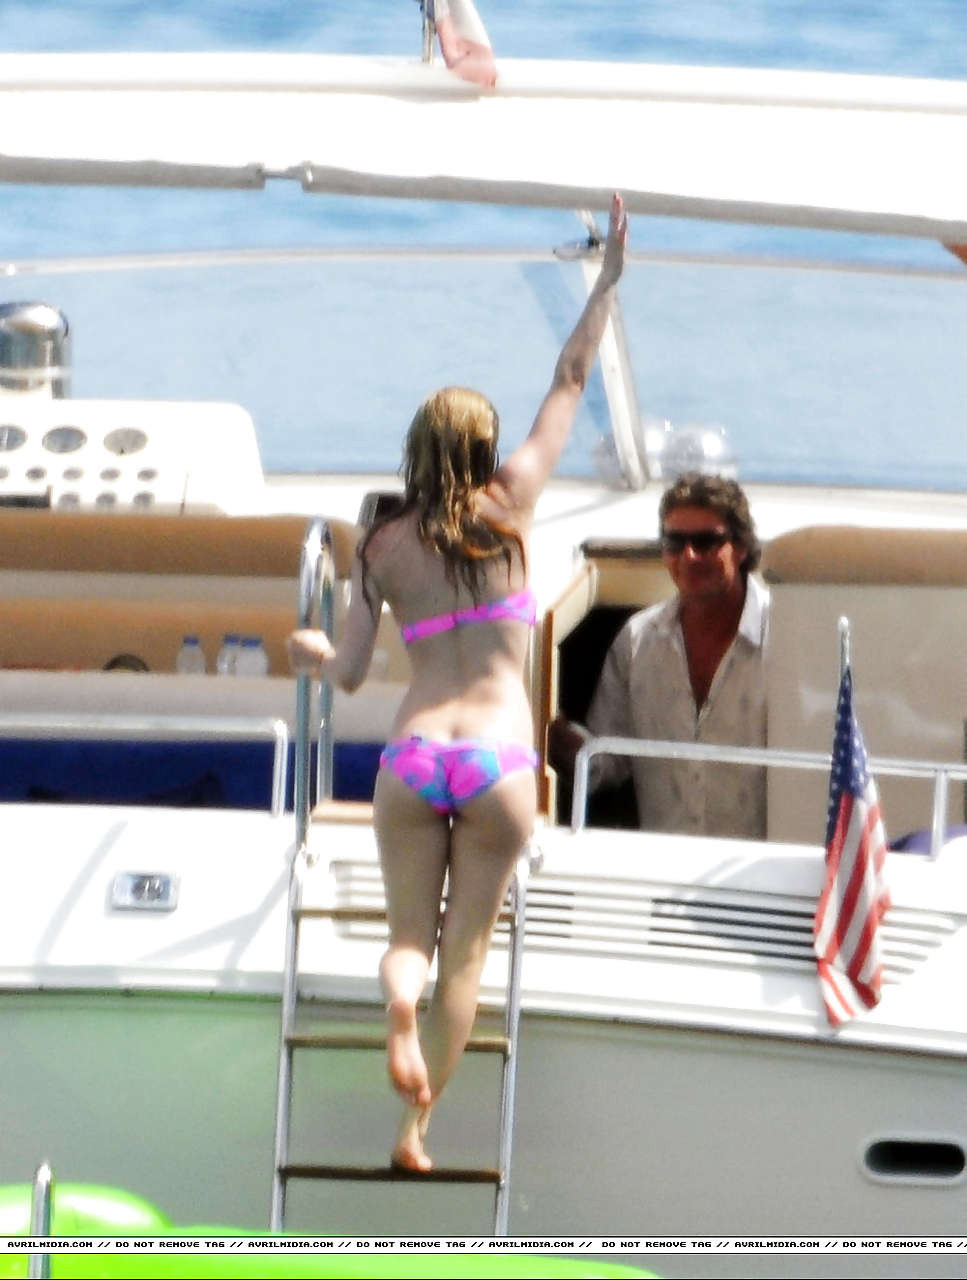 Avril Lavigne showing part of her ass and nipple slip in bikini on beach #75297370